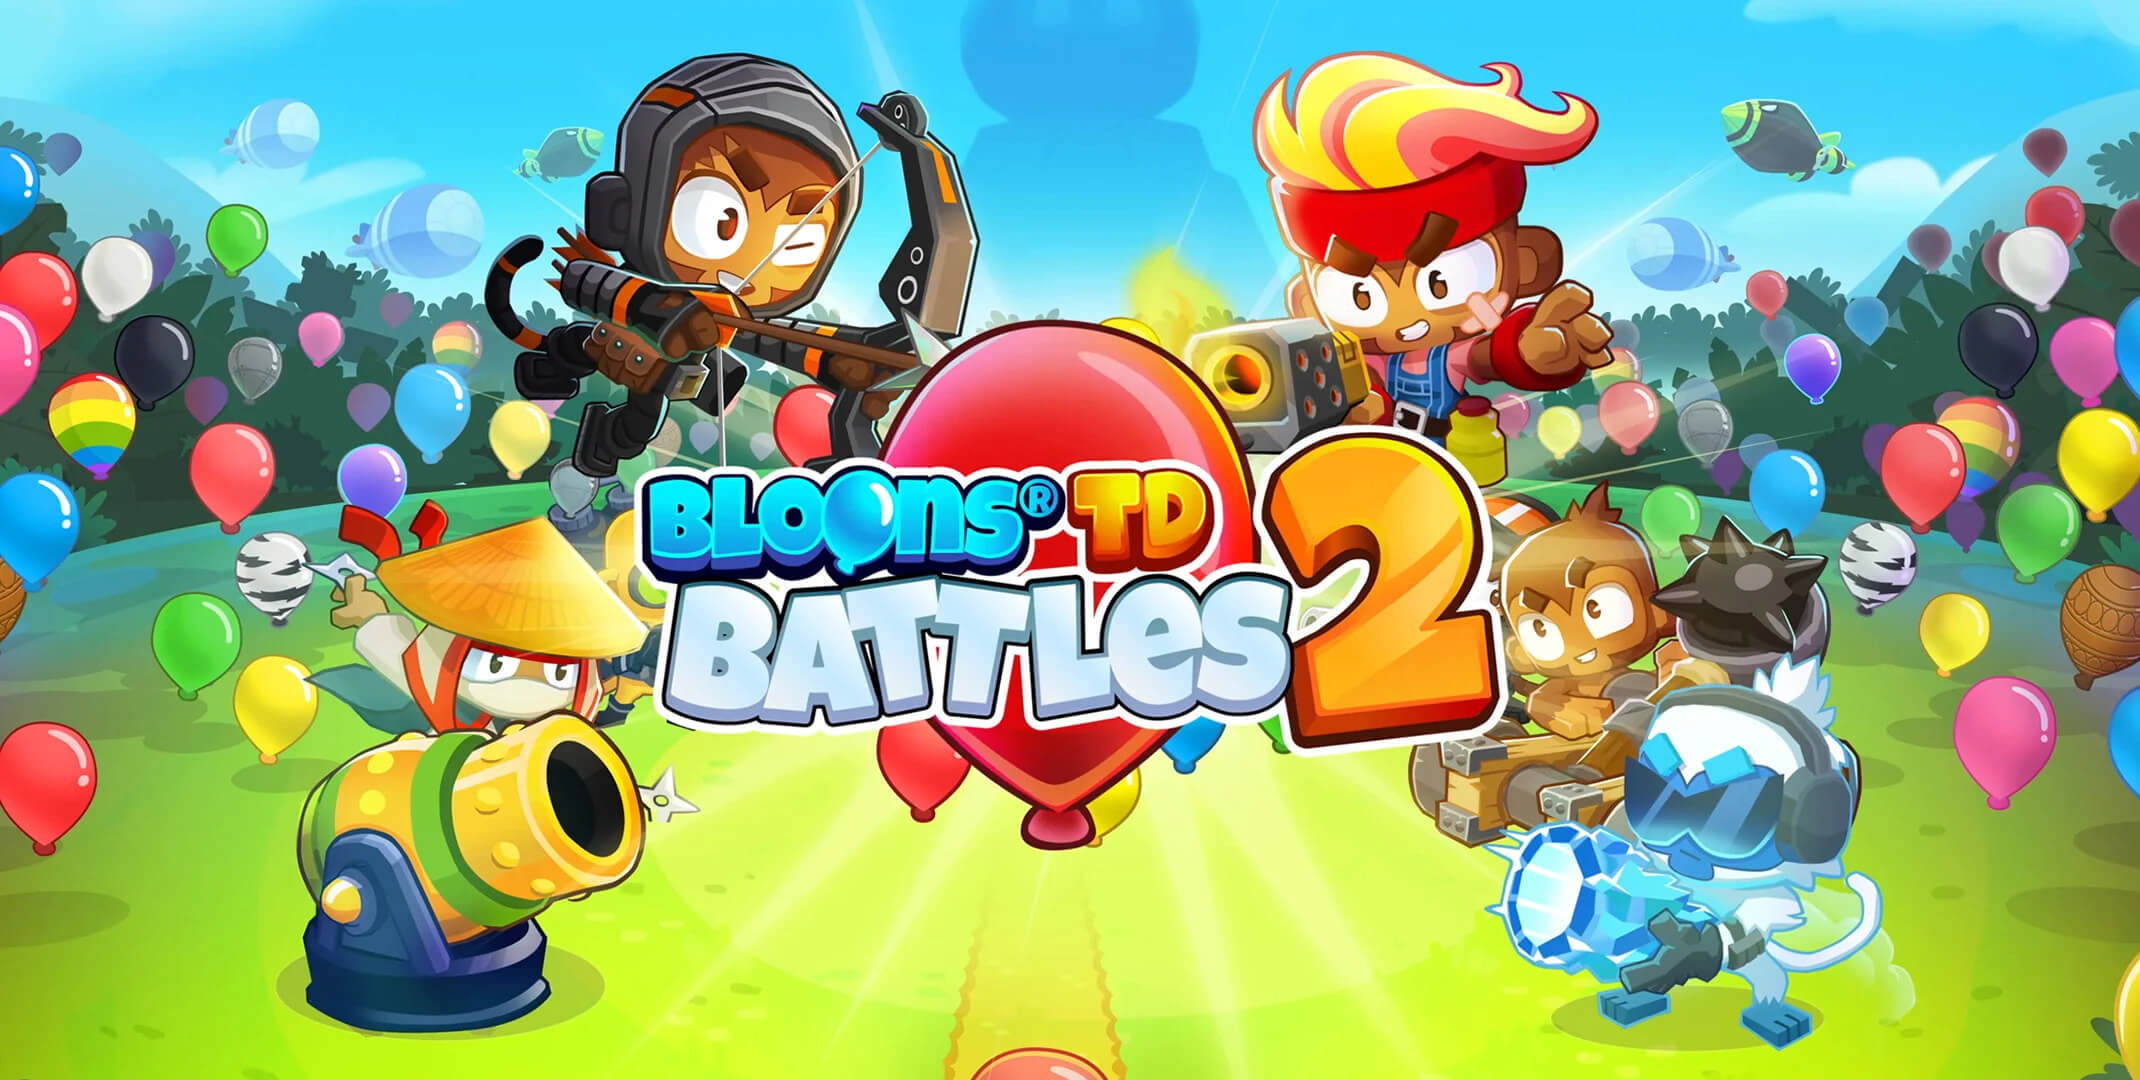 Bloons td 6 на пк. Bloons Tower Defense 2. Блунс ТД. Bloons td Battles. Блунс ТД 6.